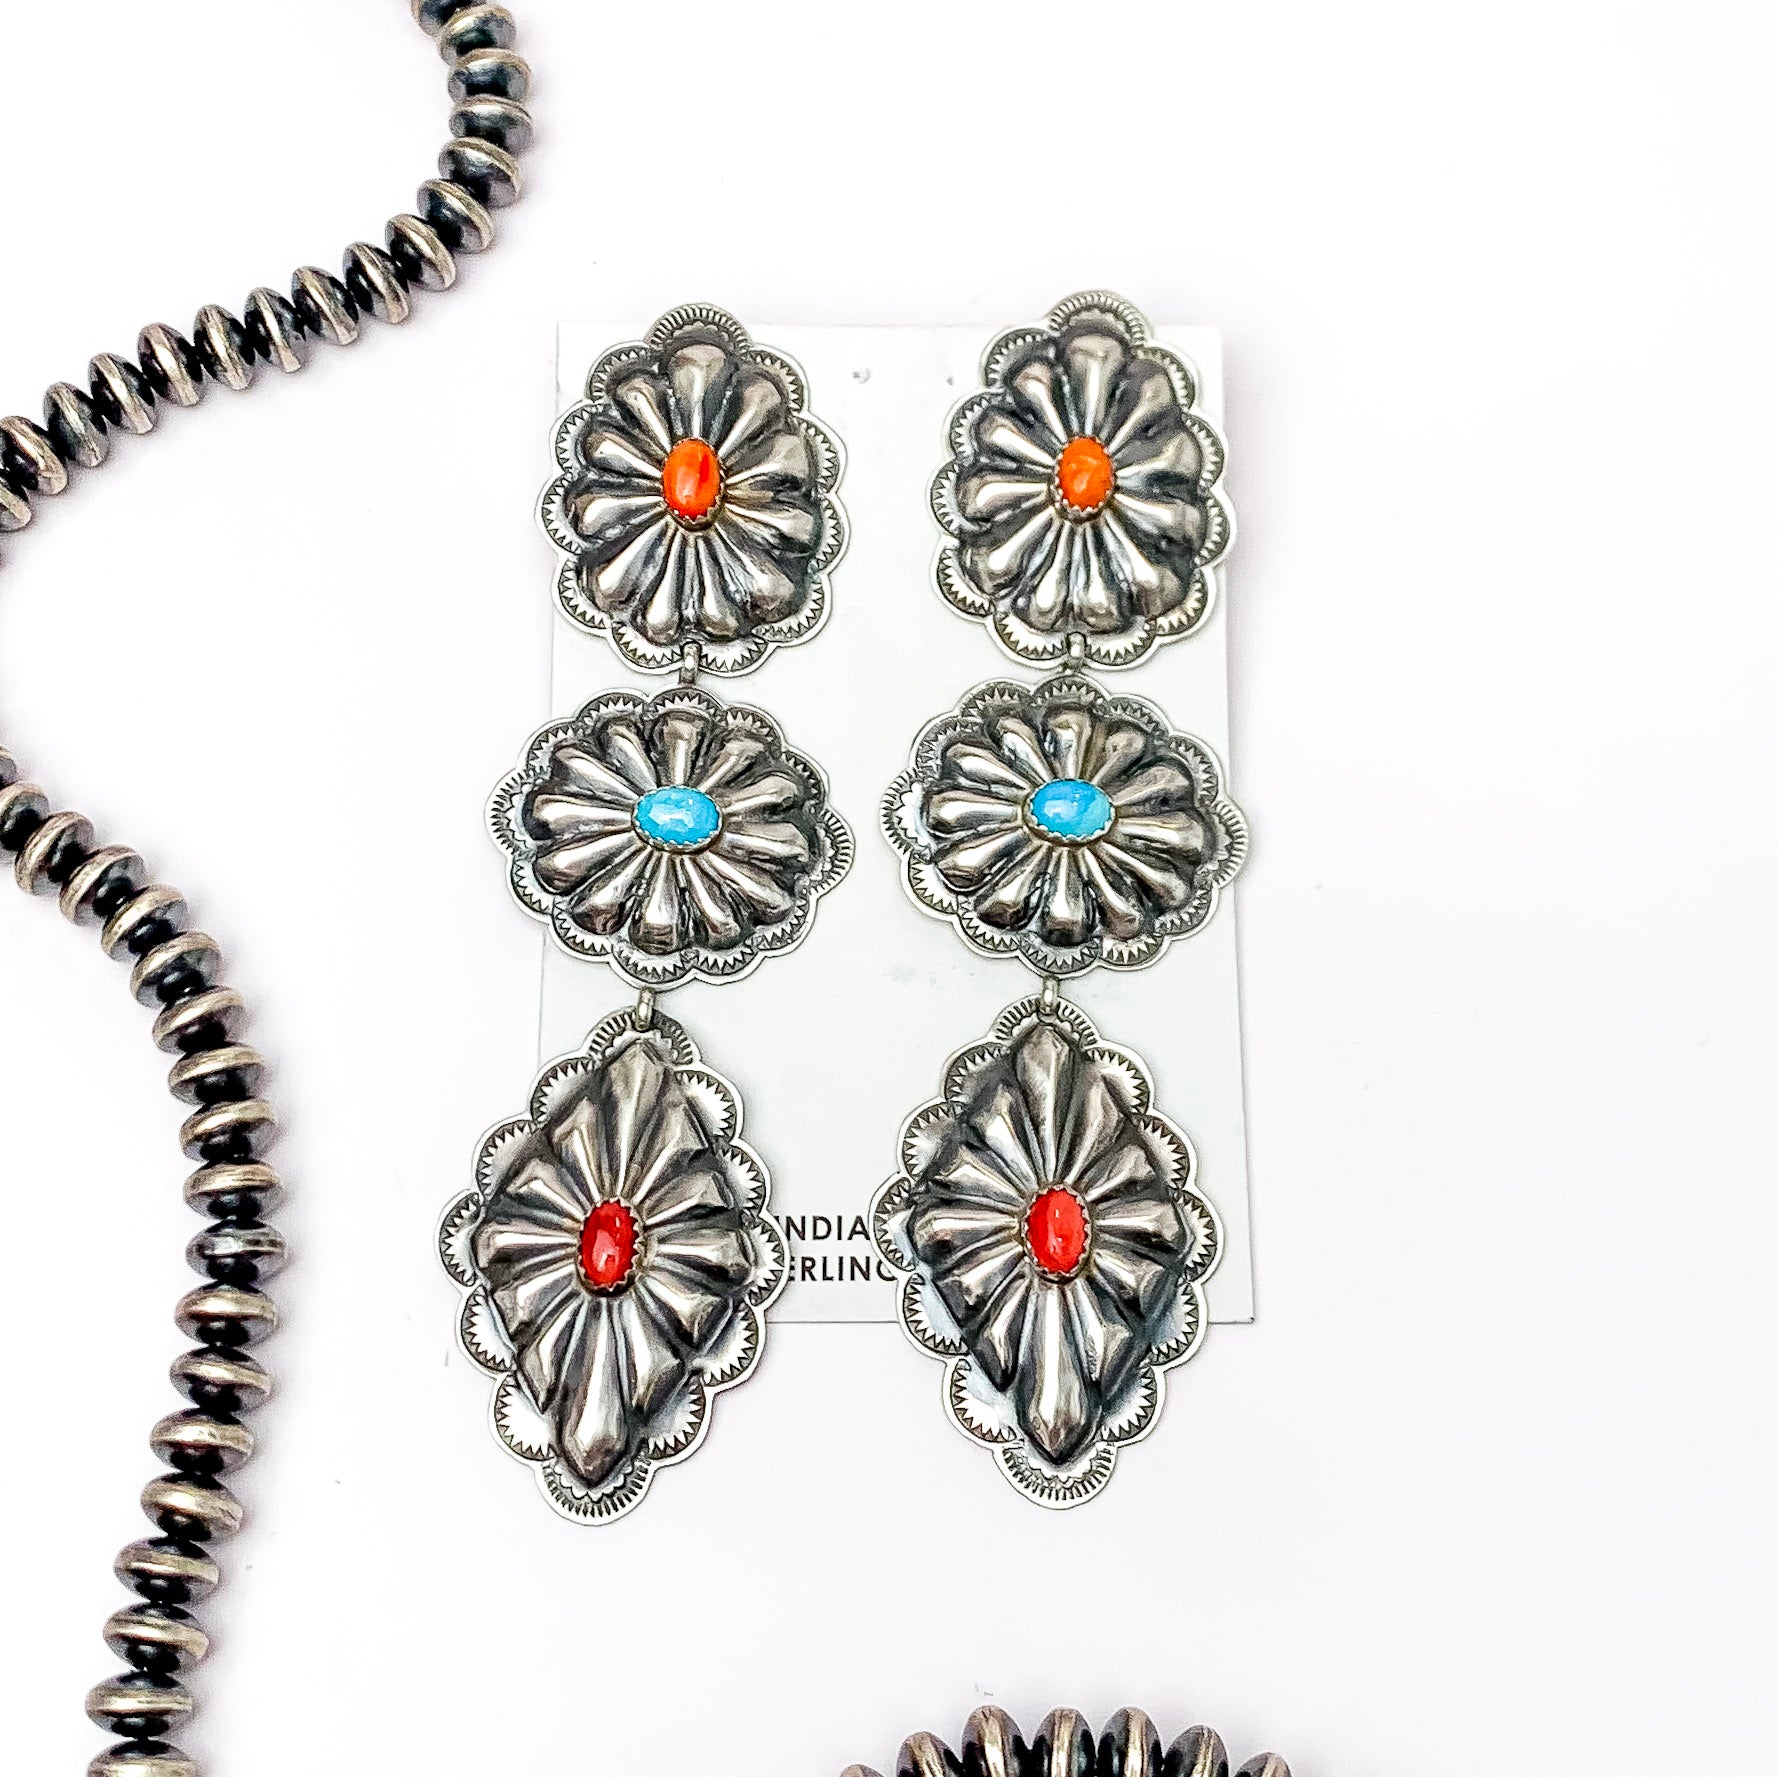 RL Begay | Navajo Handmade Sterling Silver Concho Drop Earrings with Turquoise Red, and Orange Stones - Giddy Up Glamour Boutique